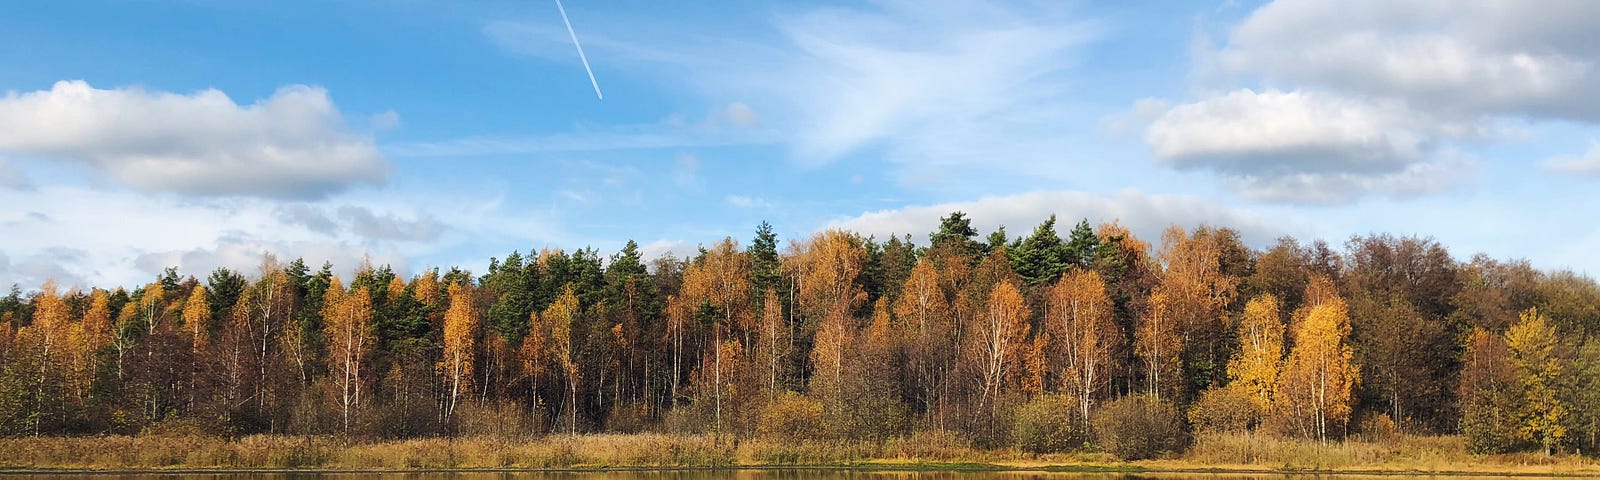 conifers and birch trees in autumn on a lake shoreline